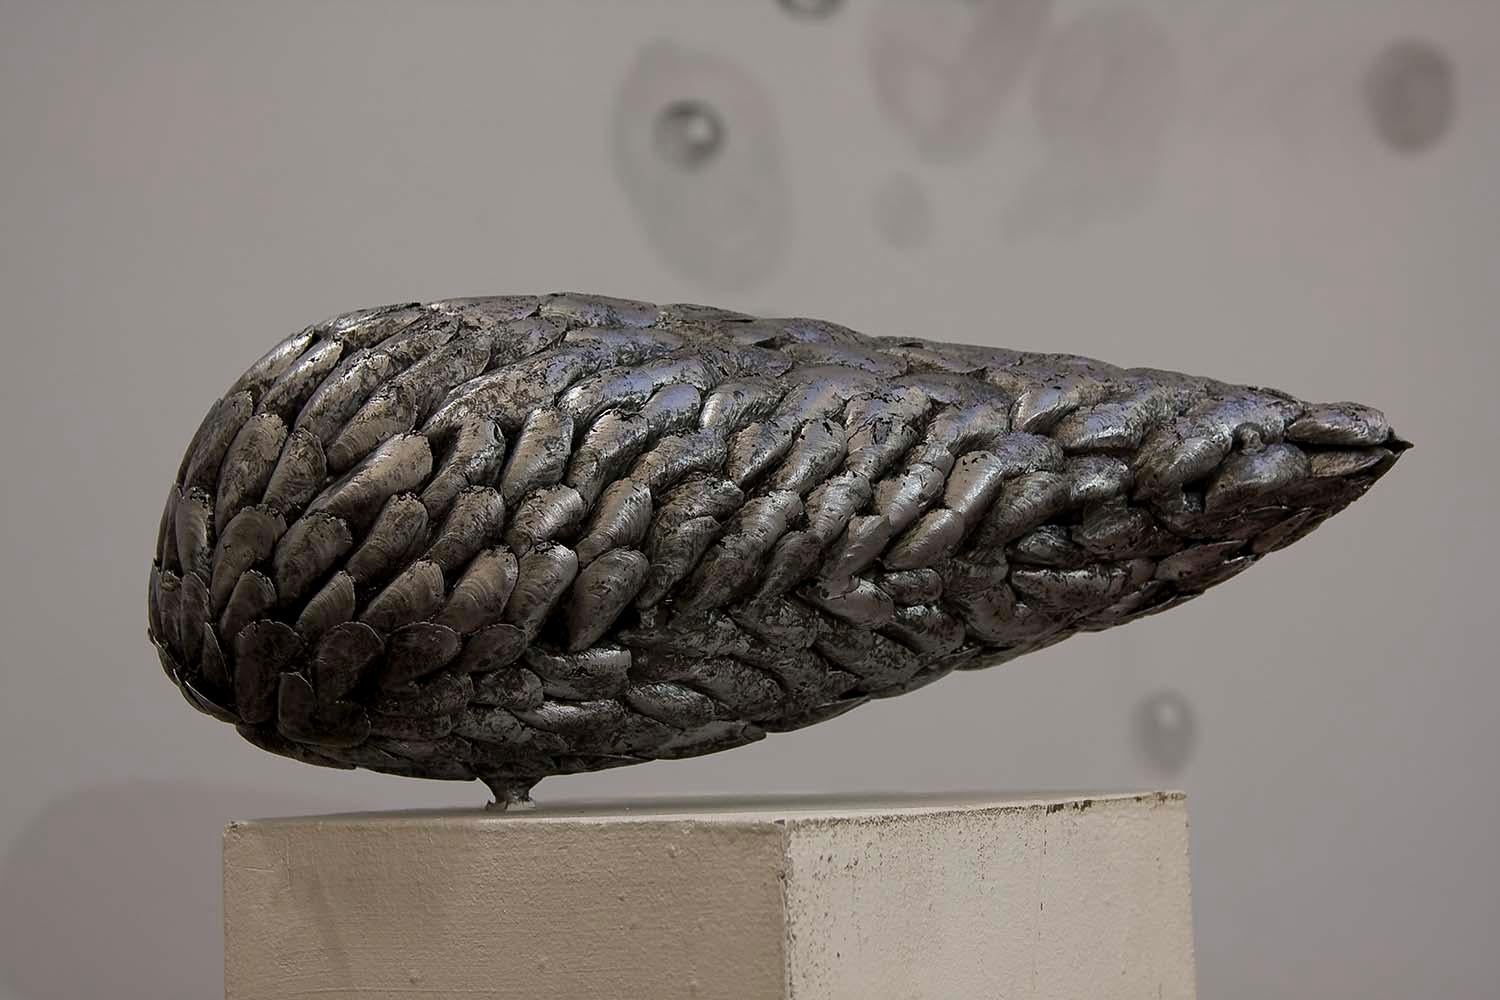 Mussel I is a unique aluminium sculpture by contemporary artist Ondřej Oliva, dimensions are 20 cm × 49 cm × 26 cm (7.9 × 19.3 × 10.2 in). The sculpture is signed and comes with a certificate of authenticity.

This figure was motivated by three